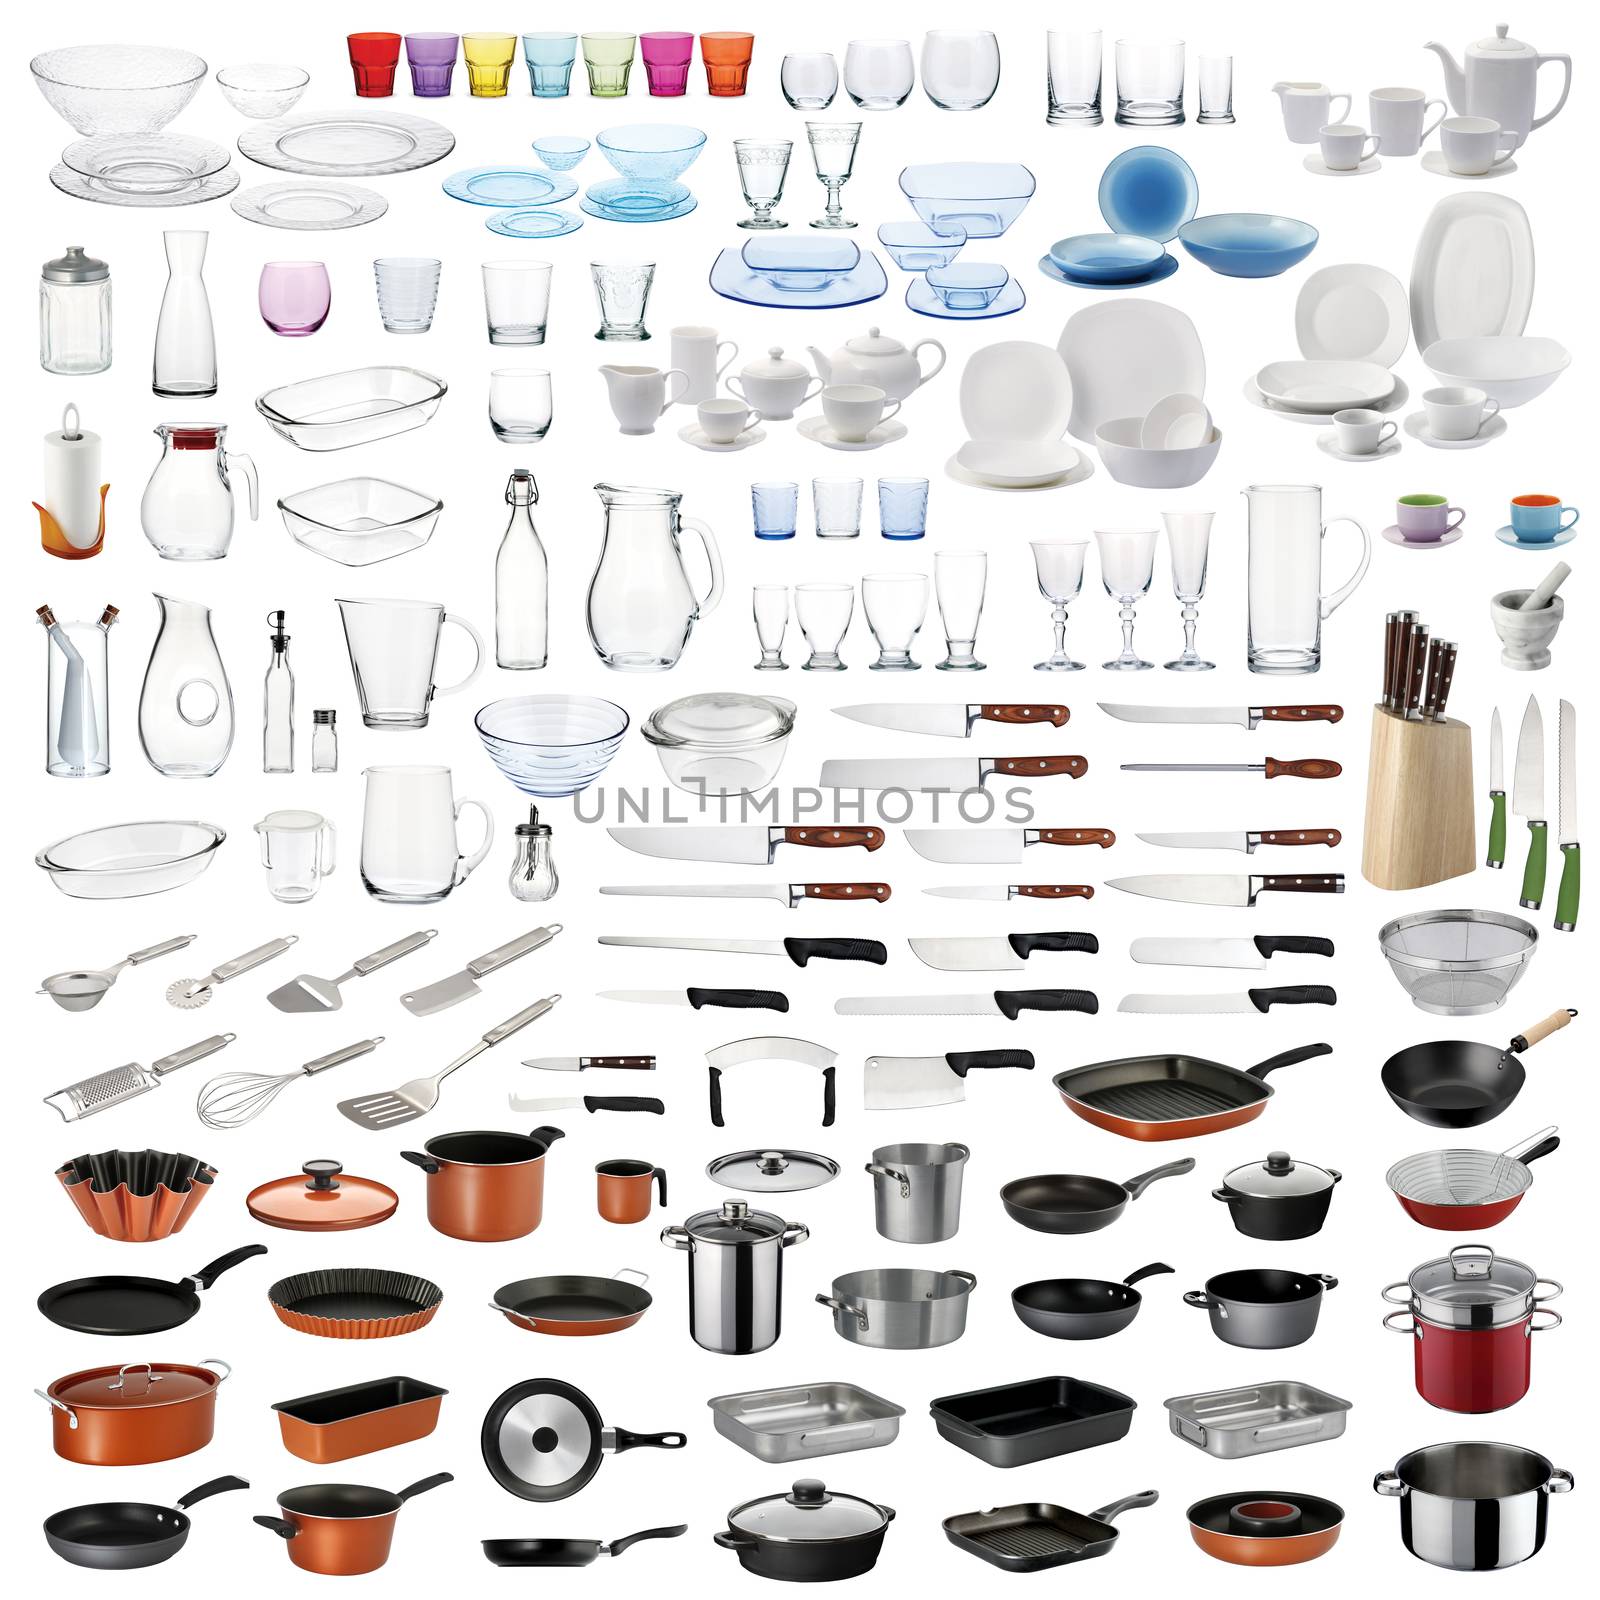 Kitchenware set with cooking/food serving utensils and dishware on white background.